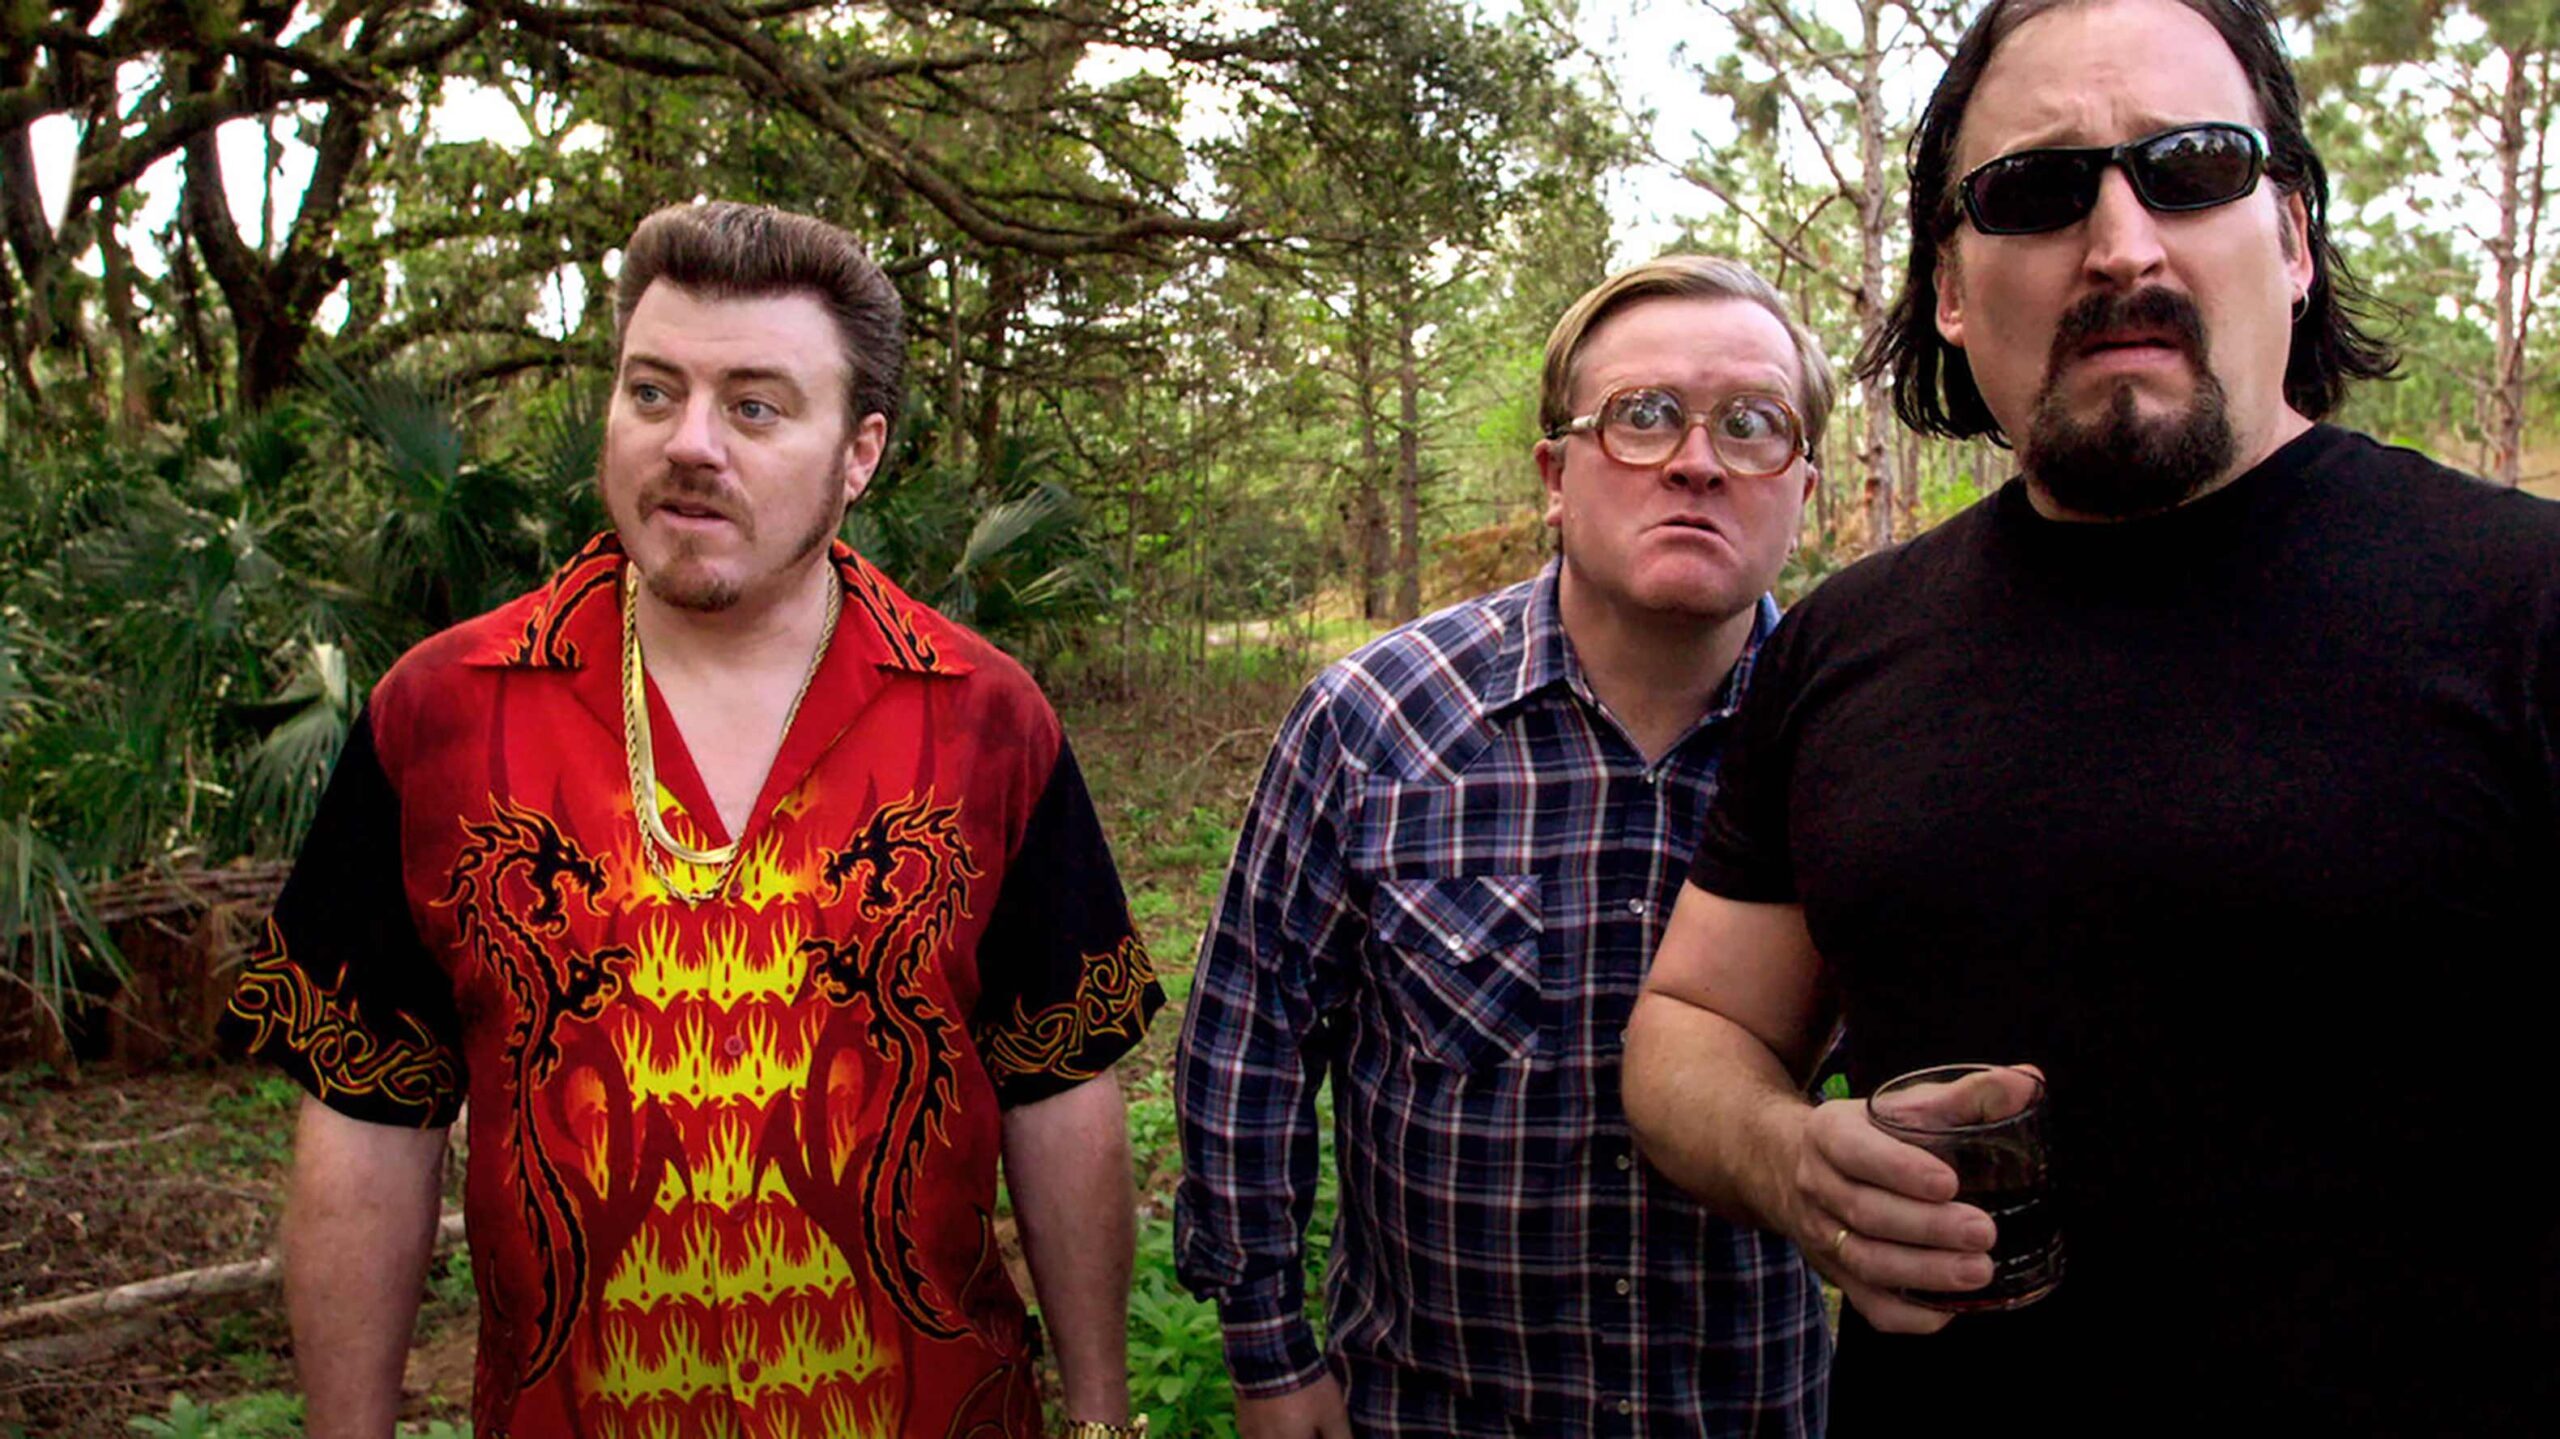 trailer-park-boys-to-appear-at-fan-expo-canada-this-summer